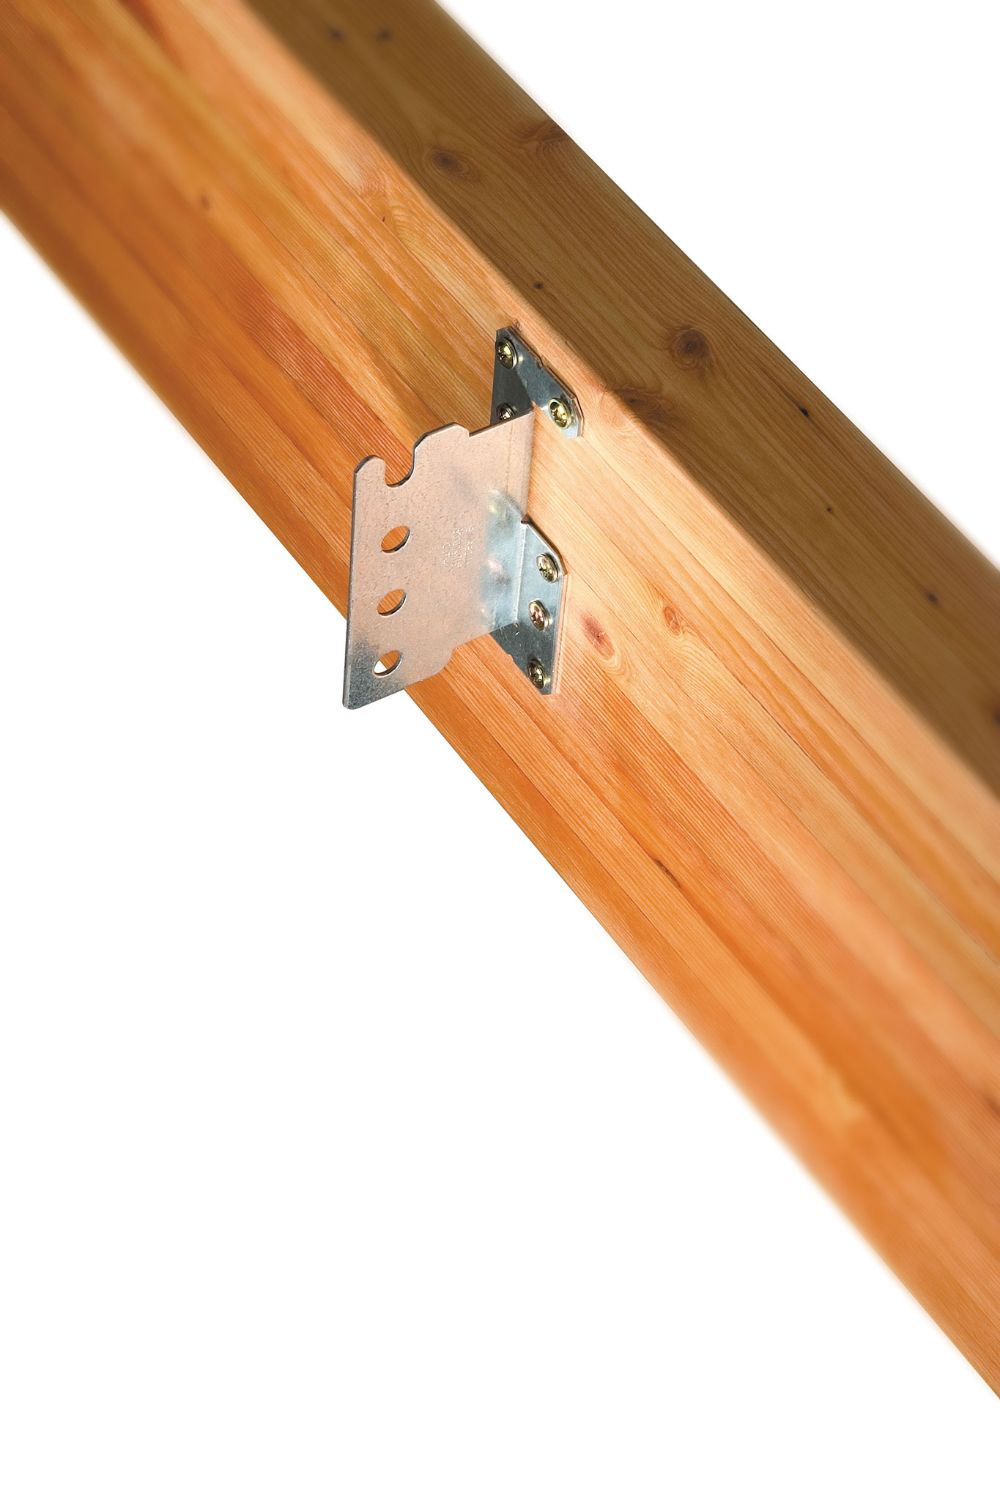 Simpson CJT5ZL Concealed Joist Tie w Long Pins ZMAX Finish image 2 of 5